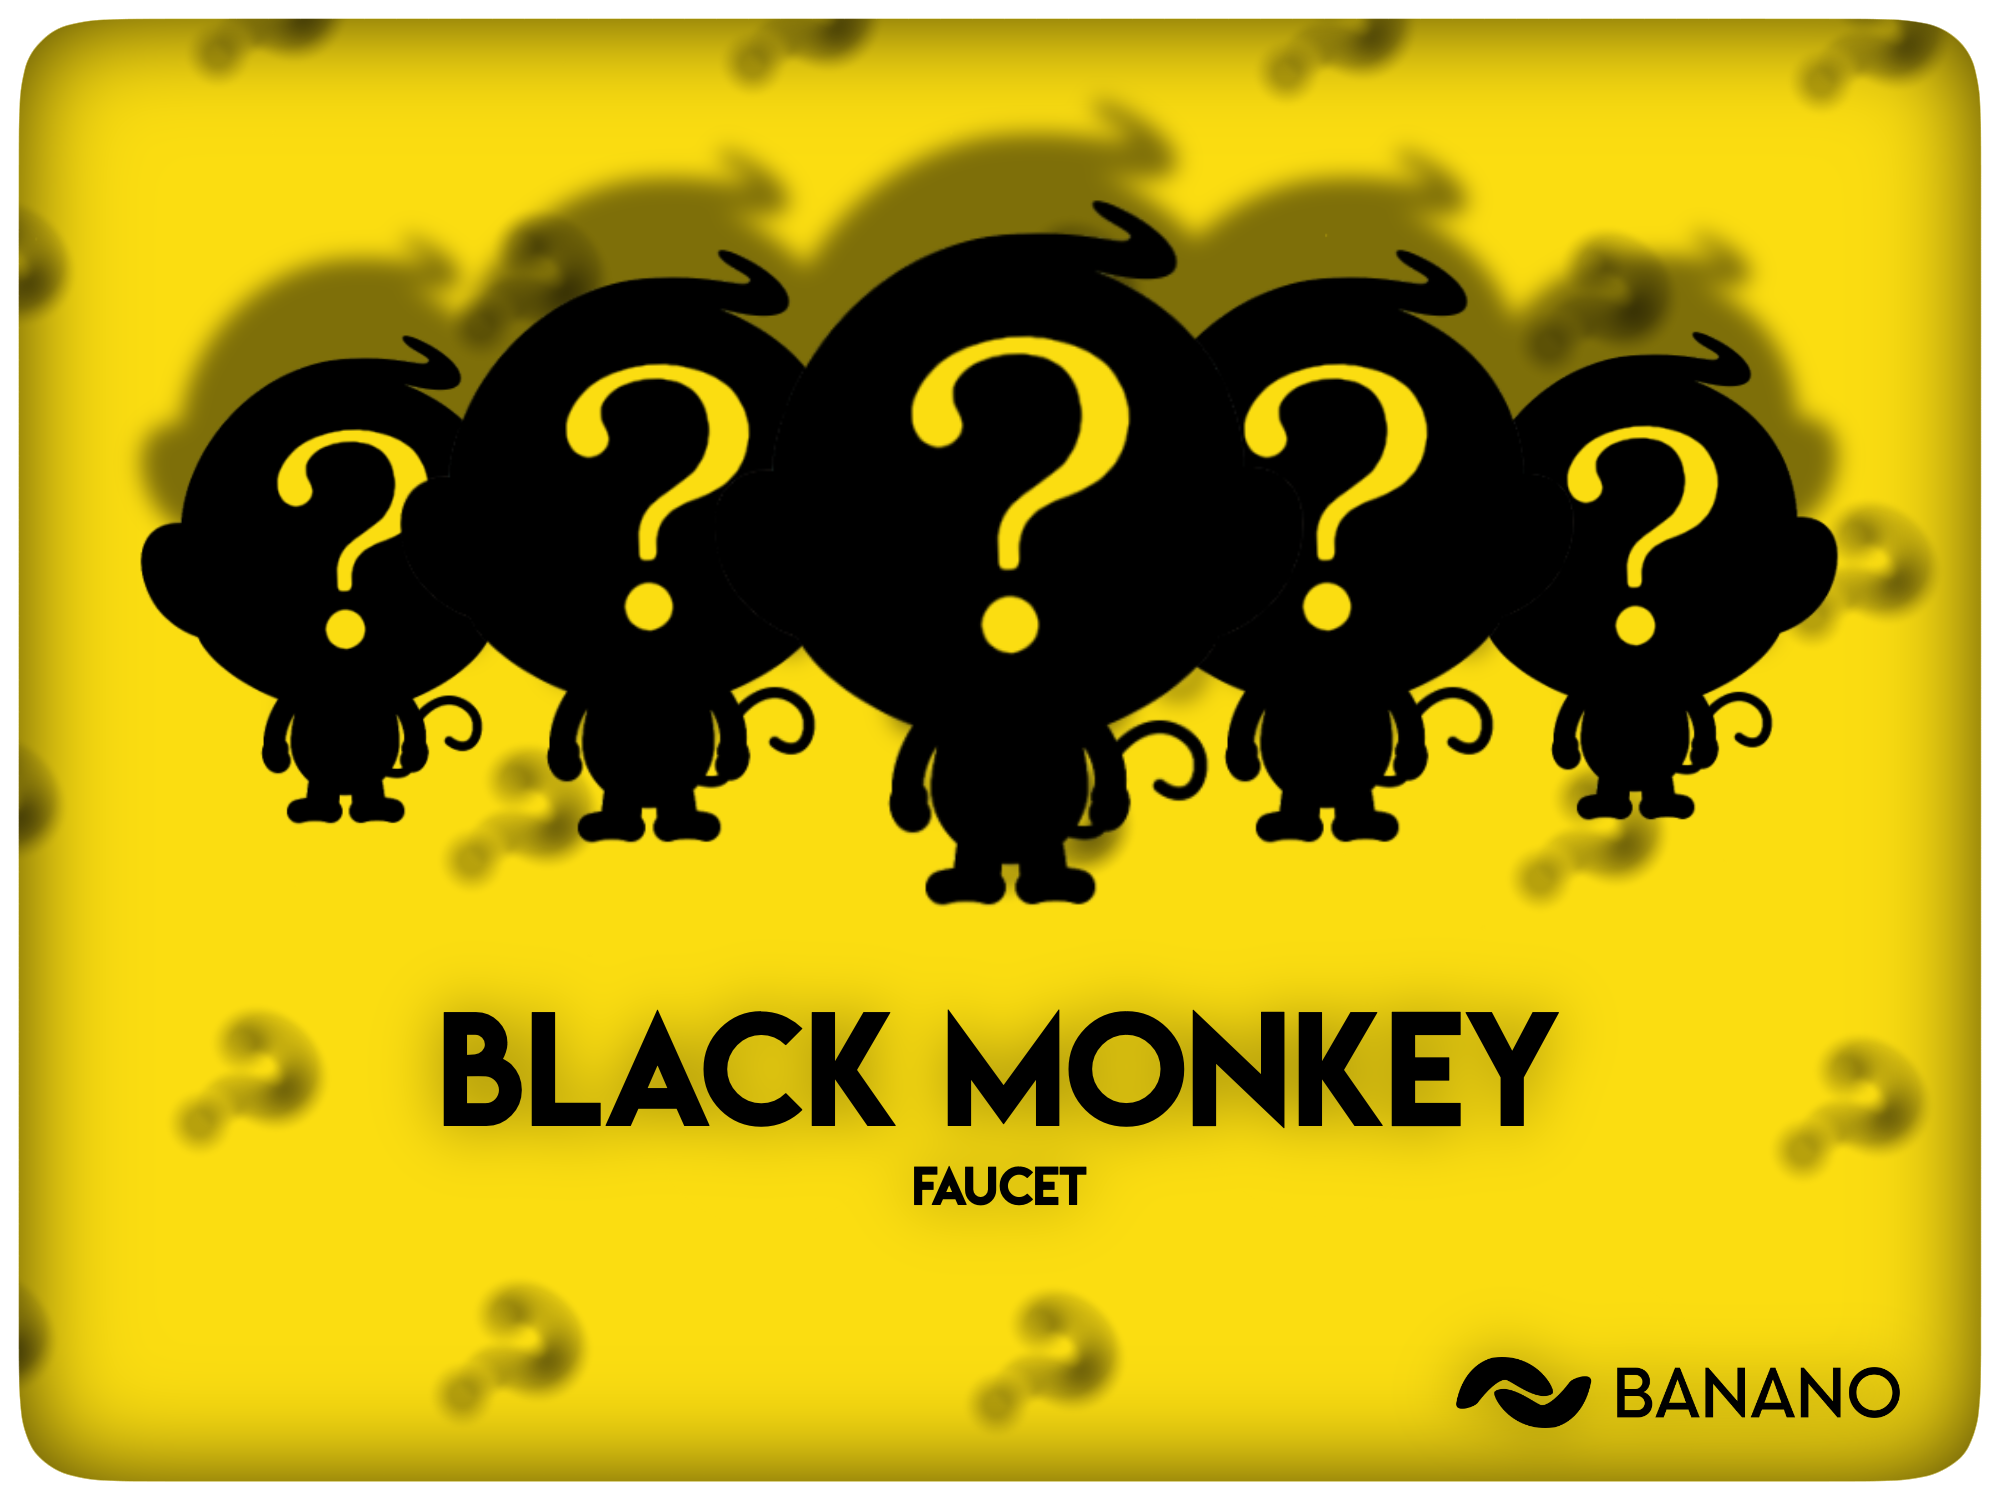 ‘Black Monkey’ Round 30 Starting Shortly! Play BANANO’s Faucet Game & Earn Free Crypto!